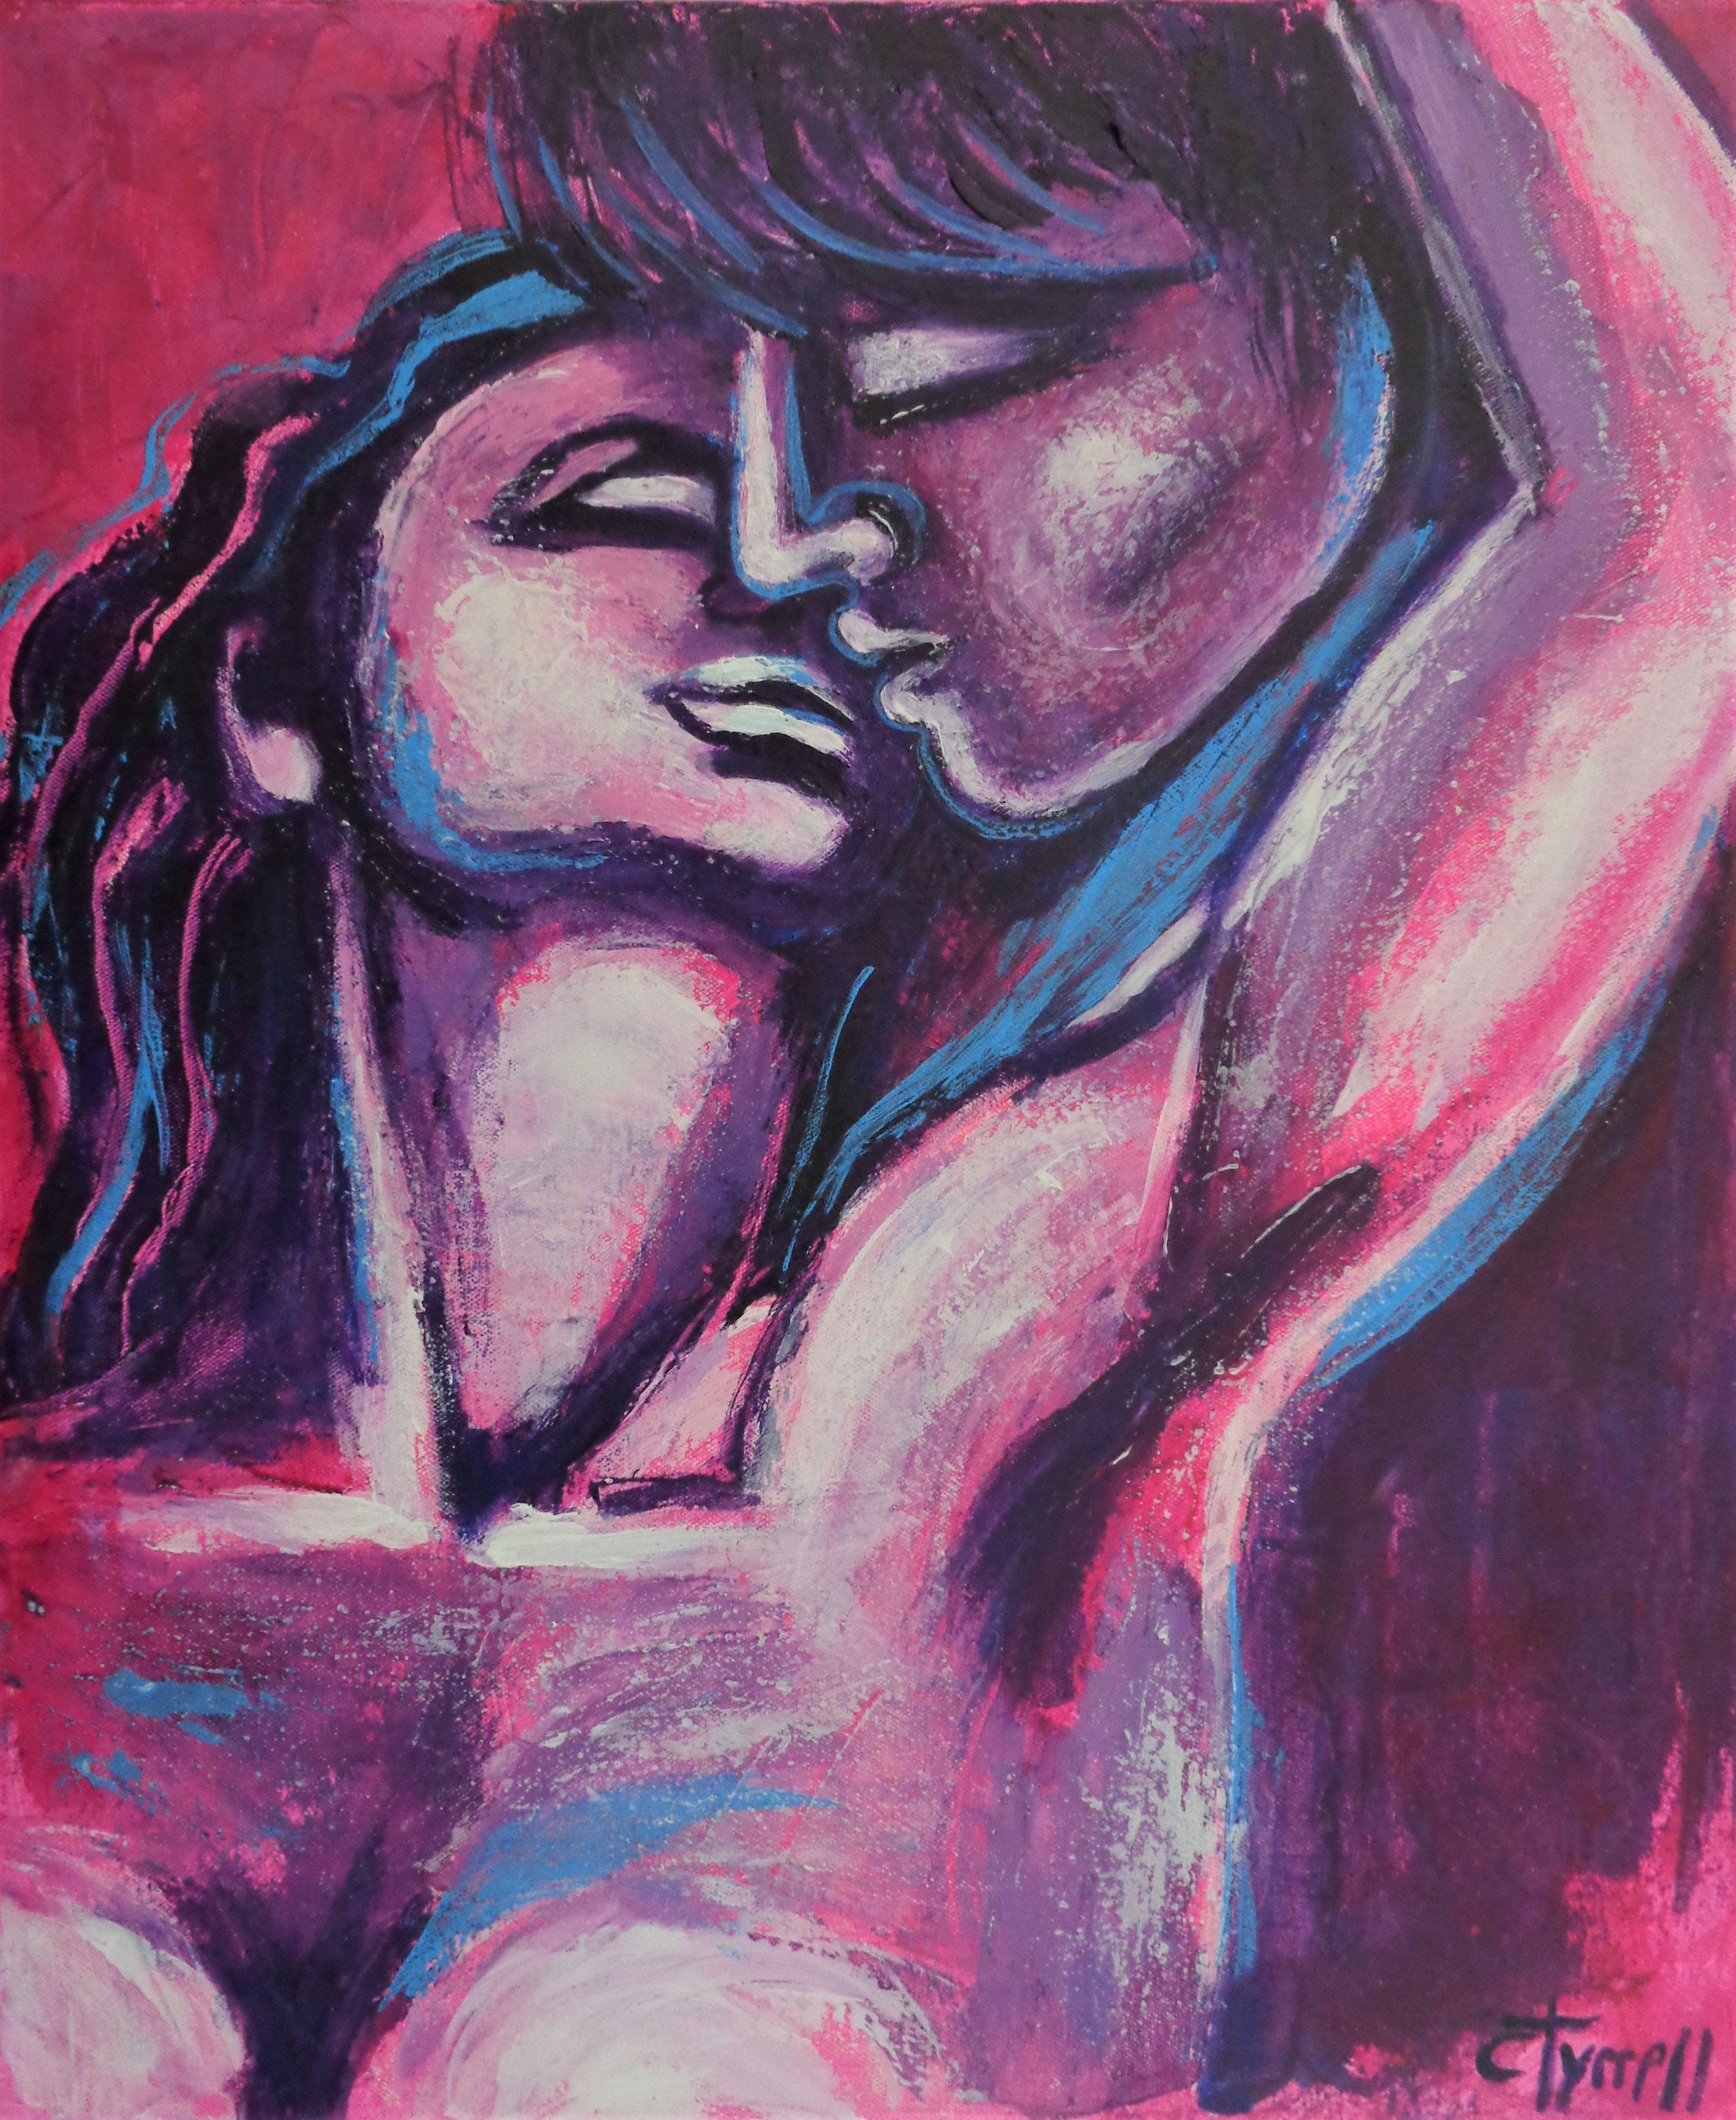 " Lovers At Sunset" is a series of 3 designs, romantic paintings of embraced lovers man and woman. The paintings are made on stretched canvas, painted edges and ready to hang. The colours used are predominant magenta and purple with white and blue,